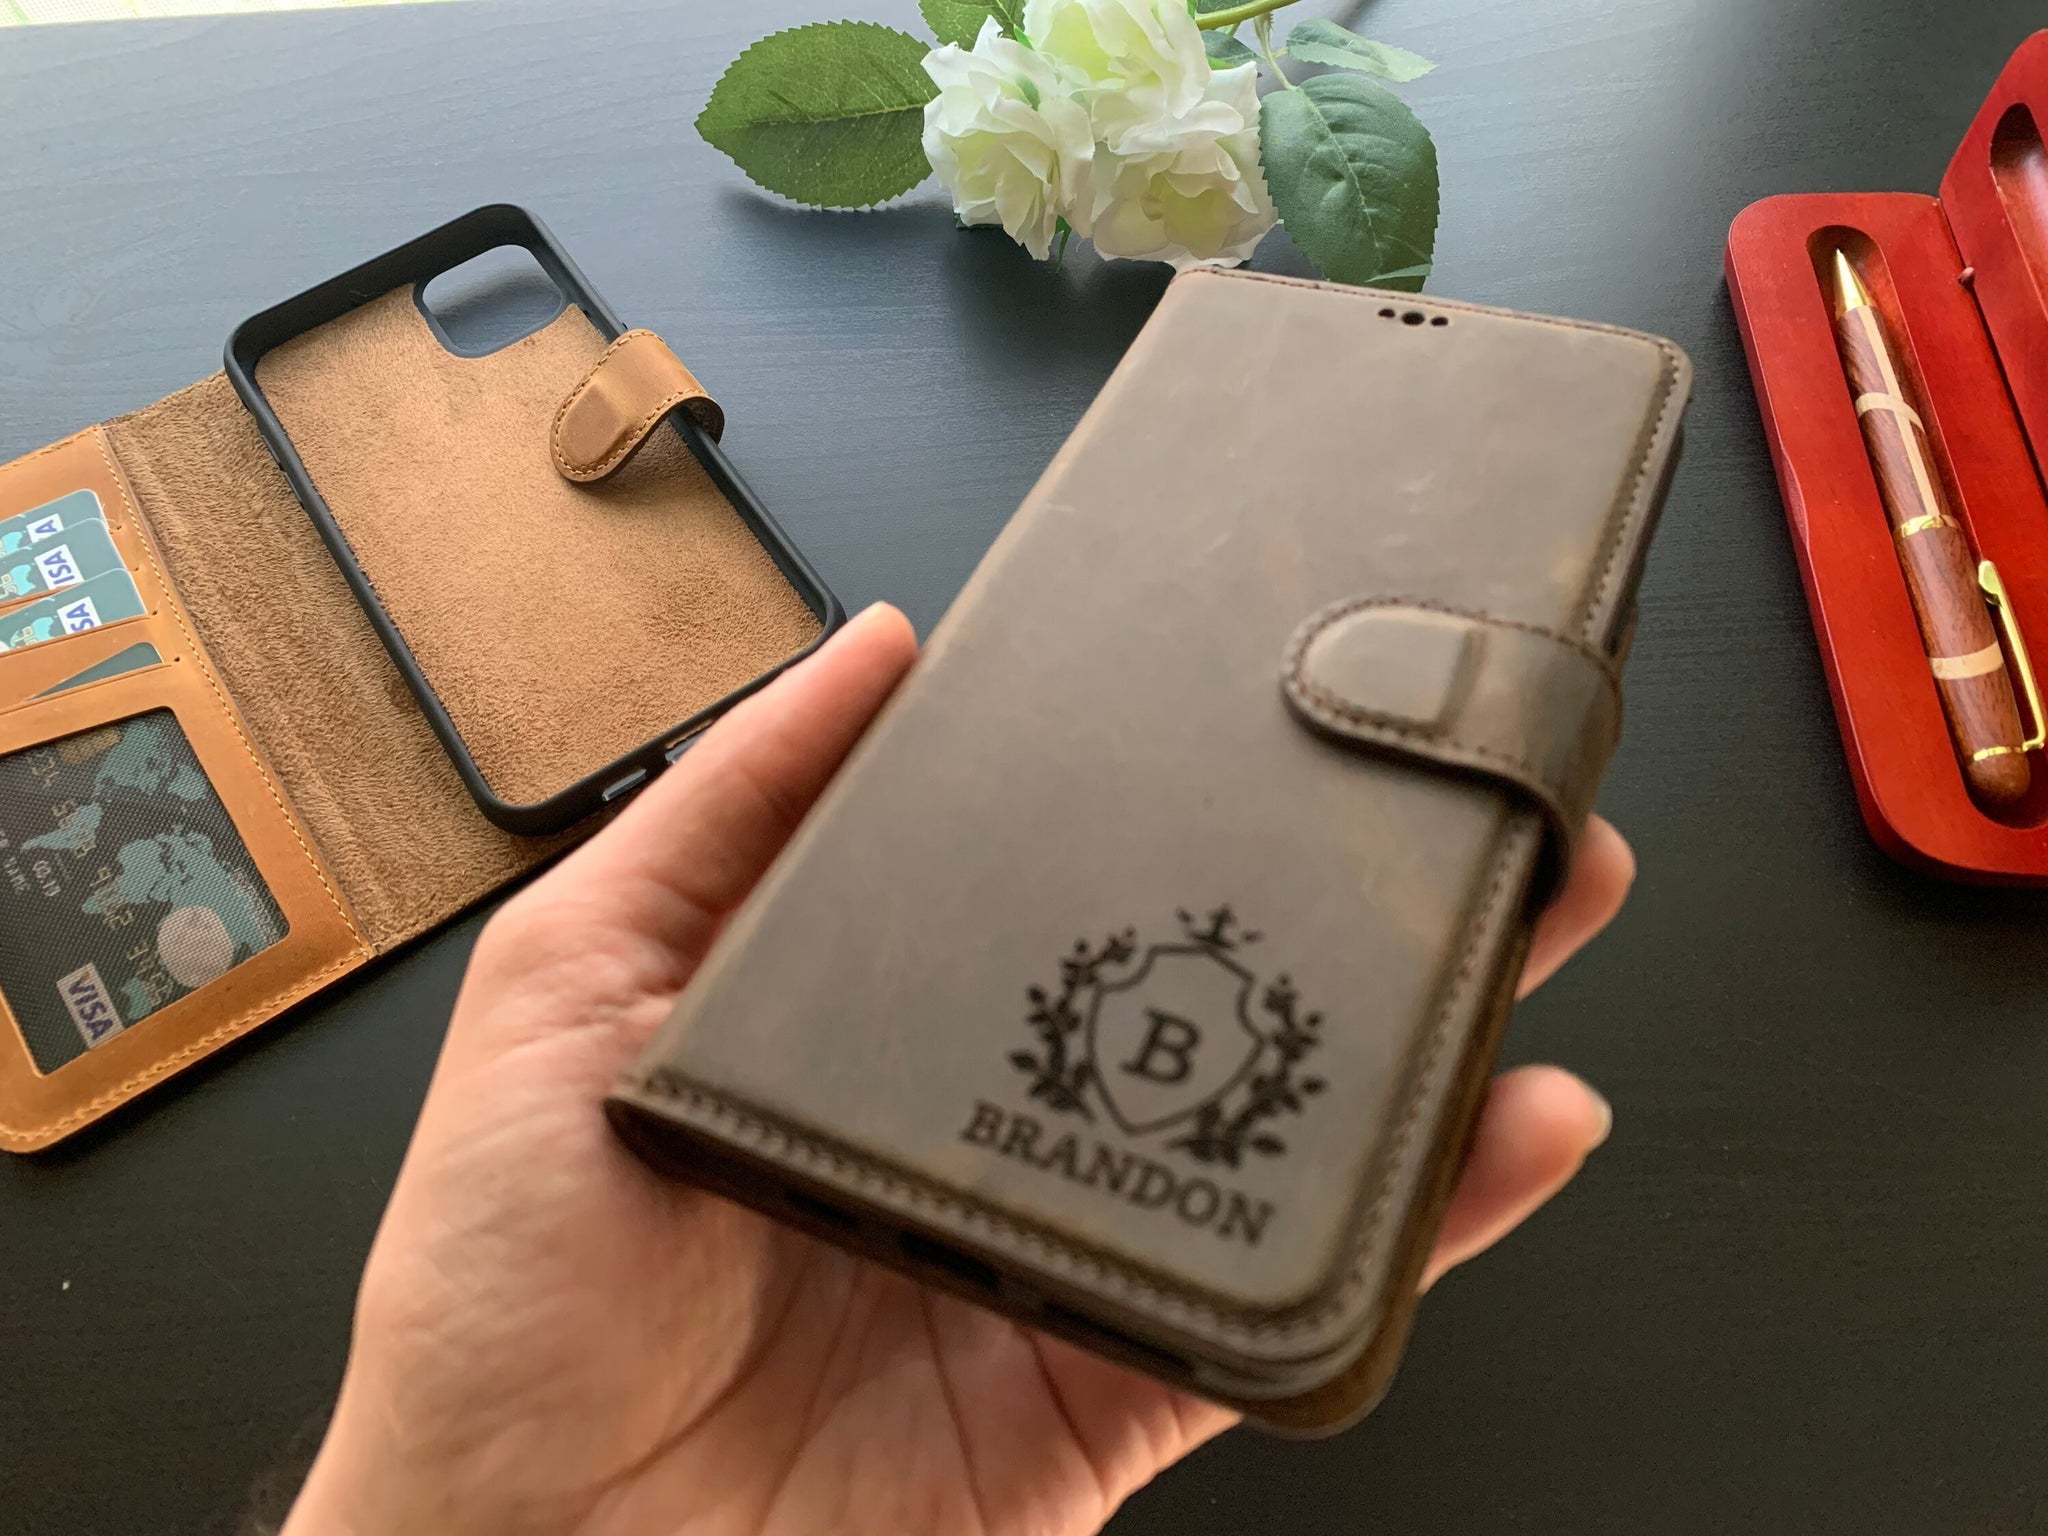 Iphone 13 Pro max case, Leather wallet, Iphone 12 case, 100% Leather Wallet Case, iPhone Leather Wallet